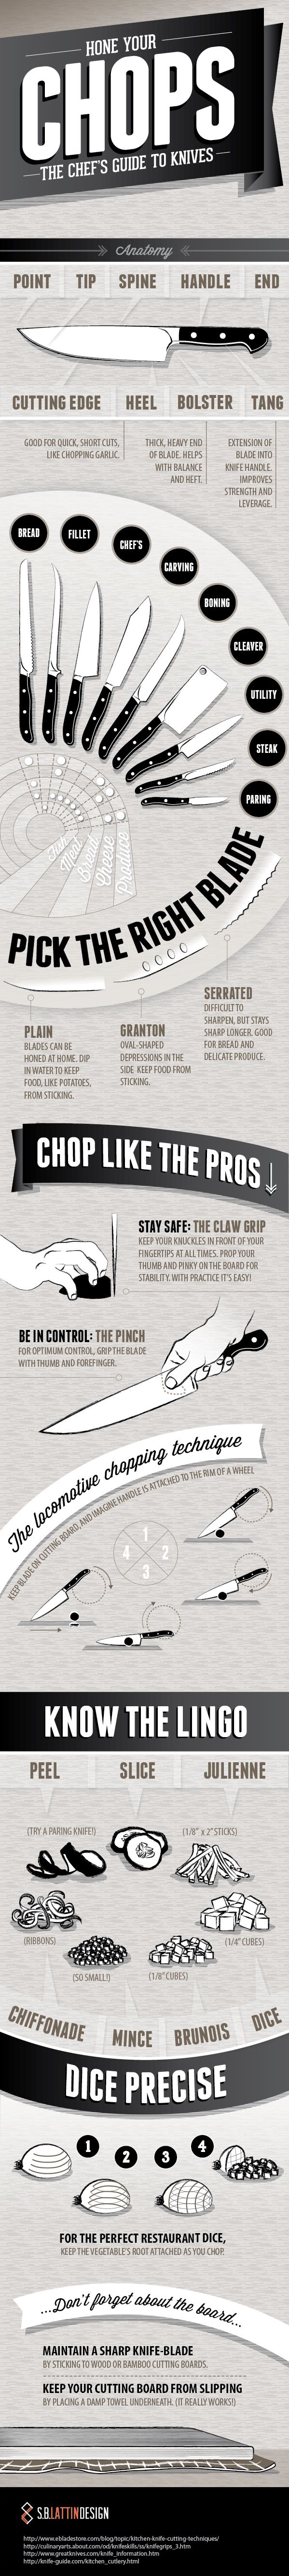 Hone Your Chops: The Chef's Guide to Knives